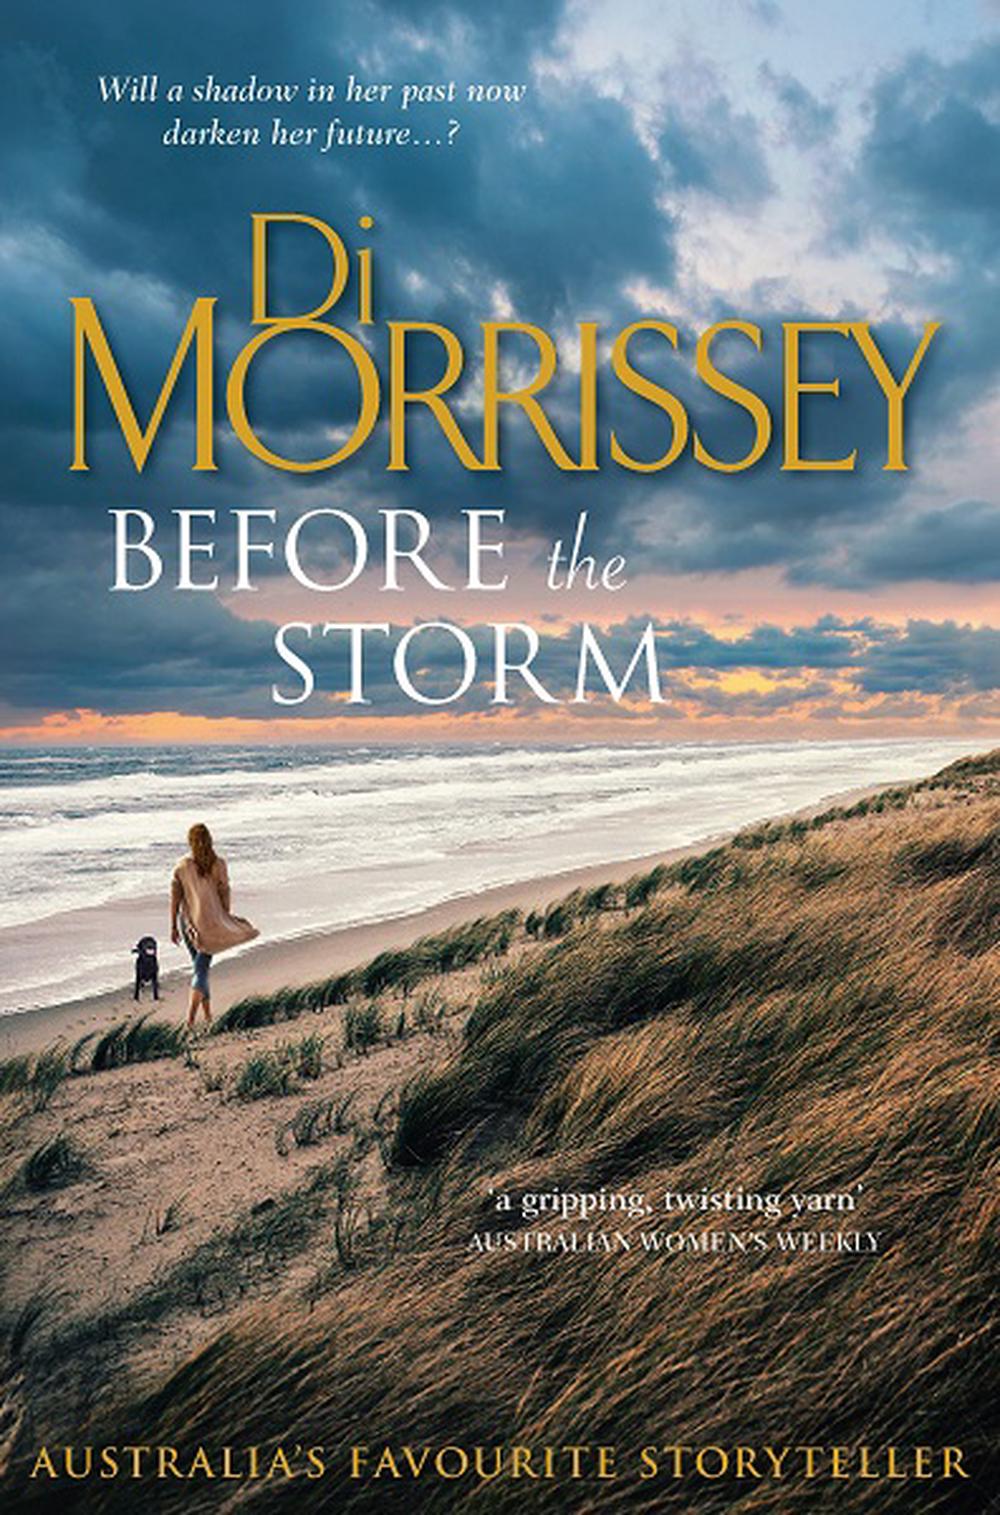 Before the Storm by Di Morrissey, Paperback, 9781760985691 | Buy online